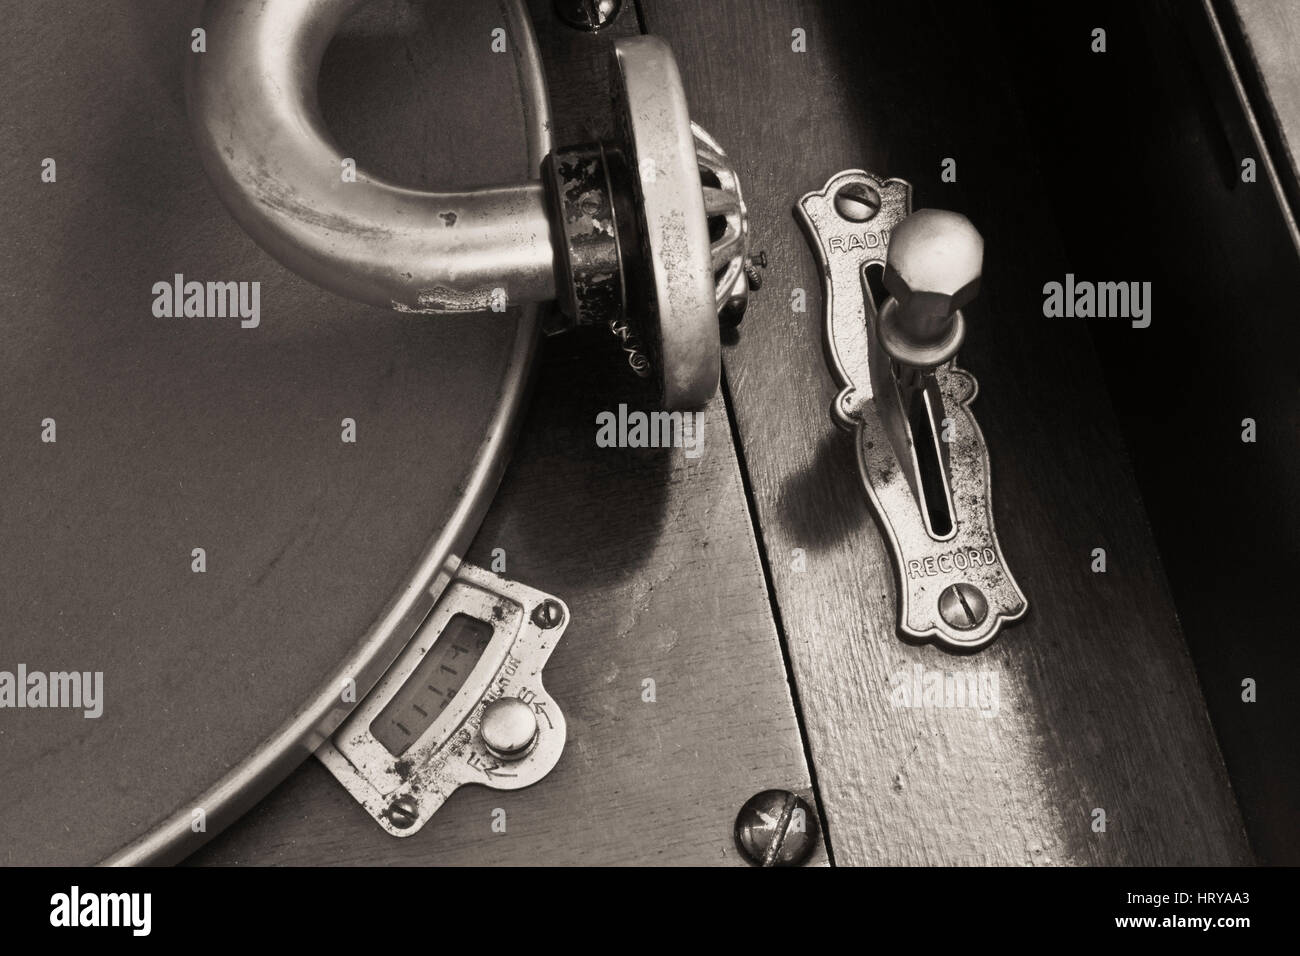 Antique Gramophone Phonograph 3 - Vintage Gramophone Phonograph Closeup With Turntable and Needle Stock Photo